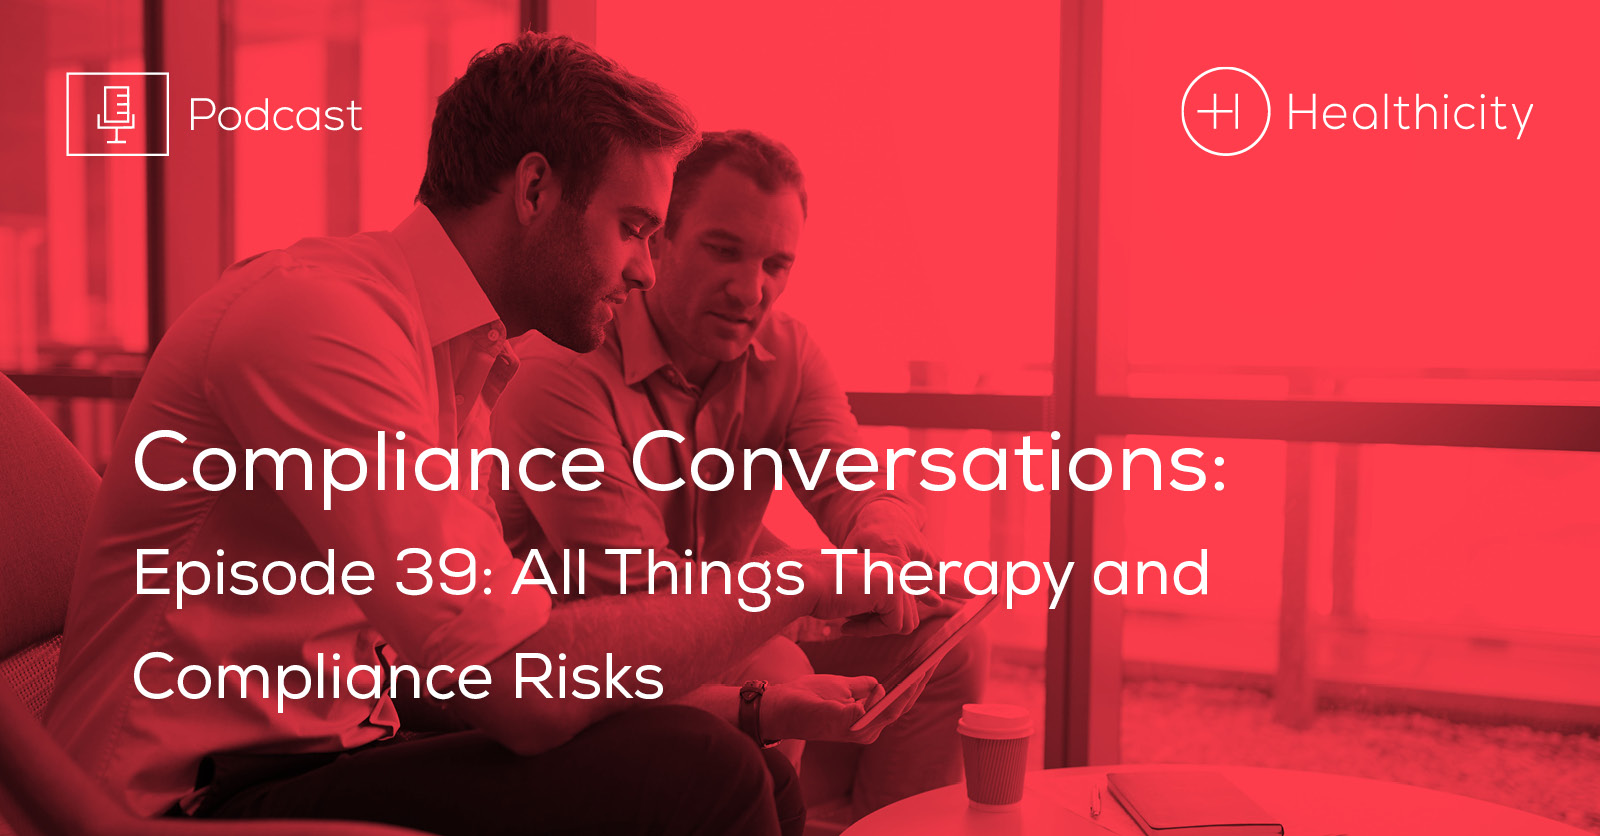 Listen to the Episode - All Things Therapy and Compliance Risks